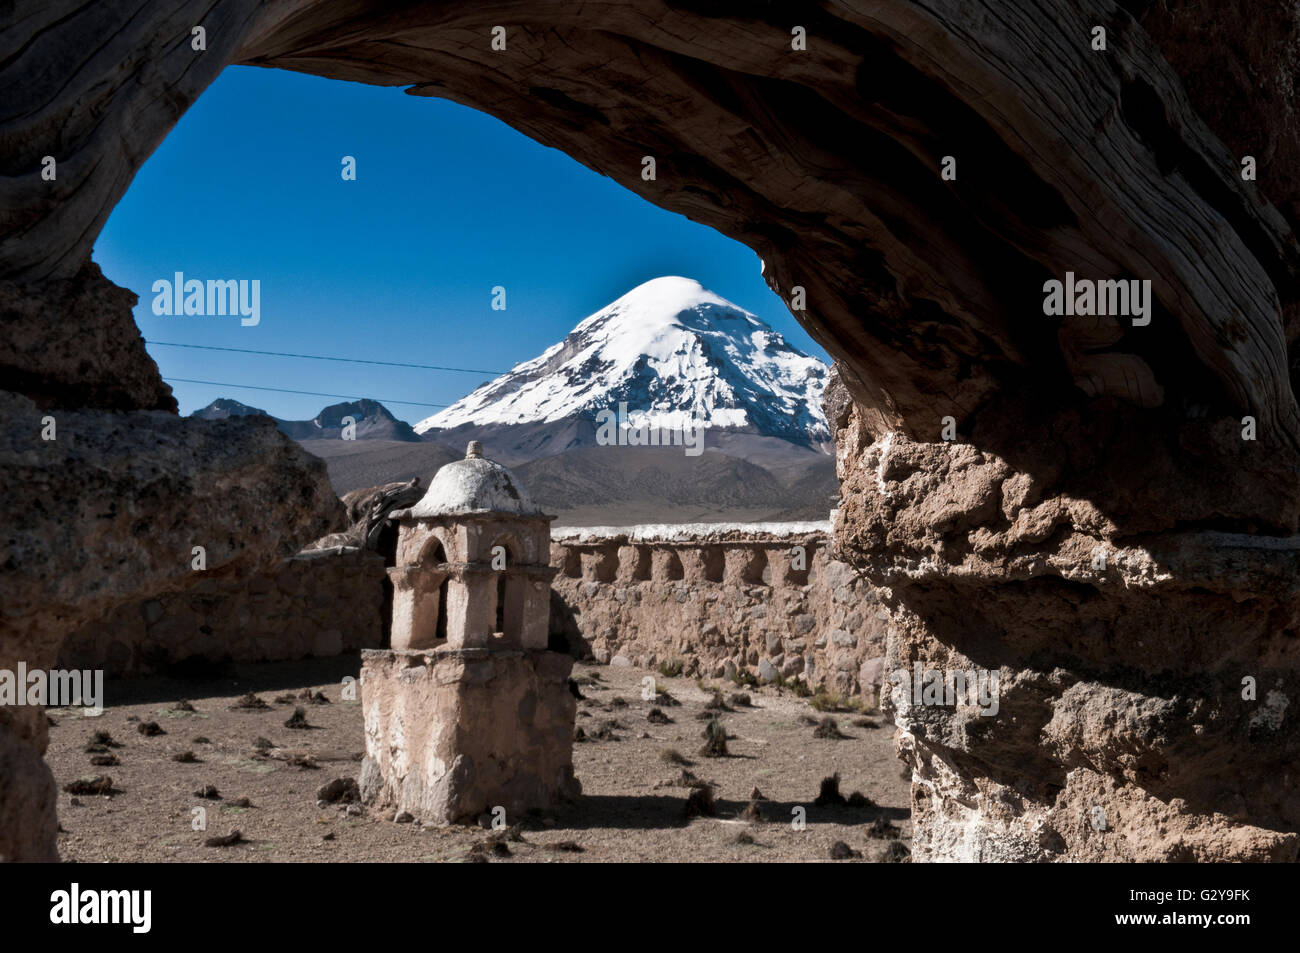 Sajama NP, Church And Snow-Capped Volcano In The Background Stock Photo